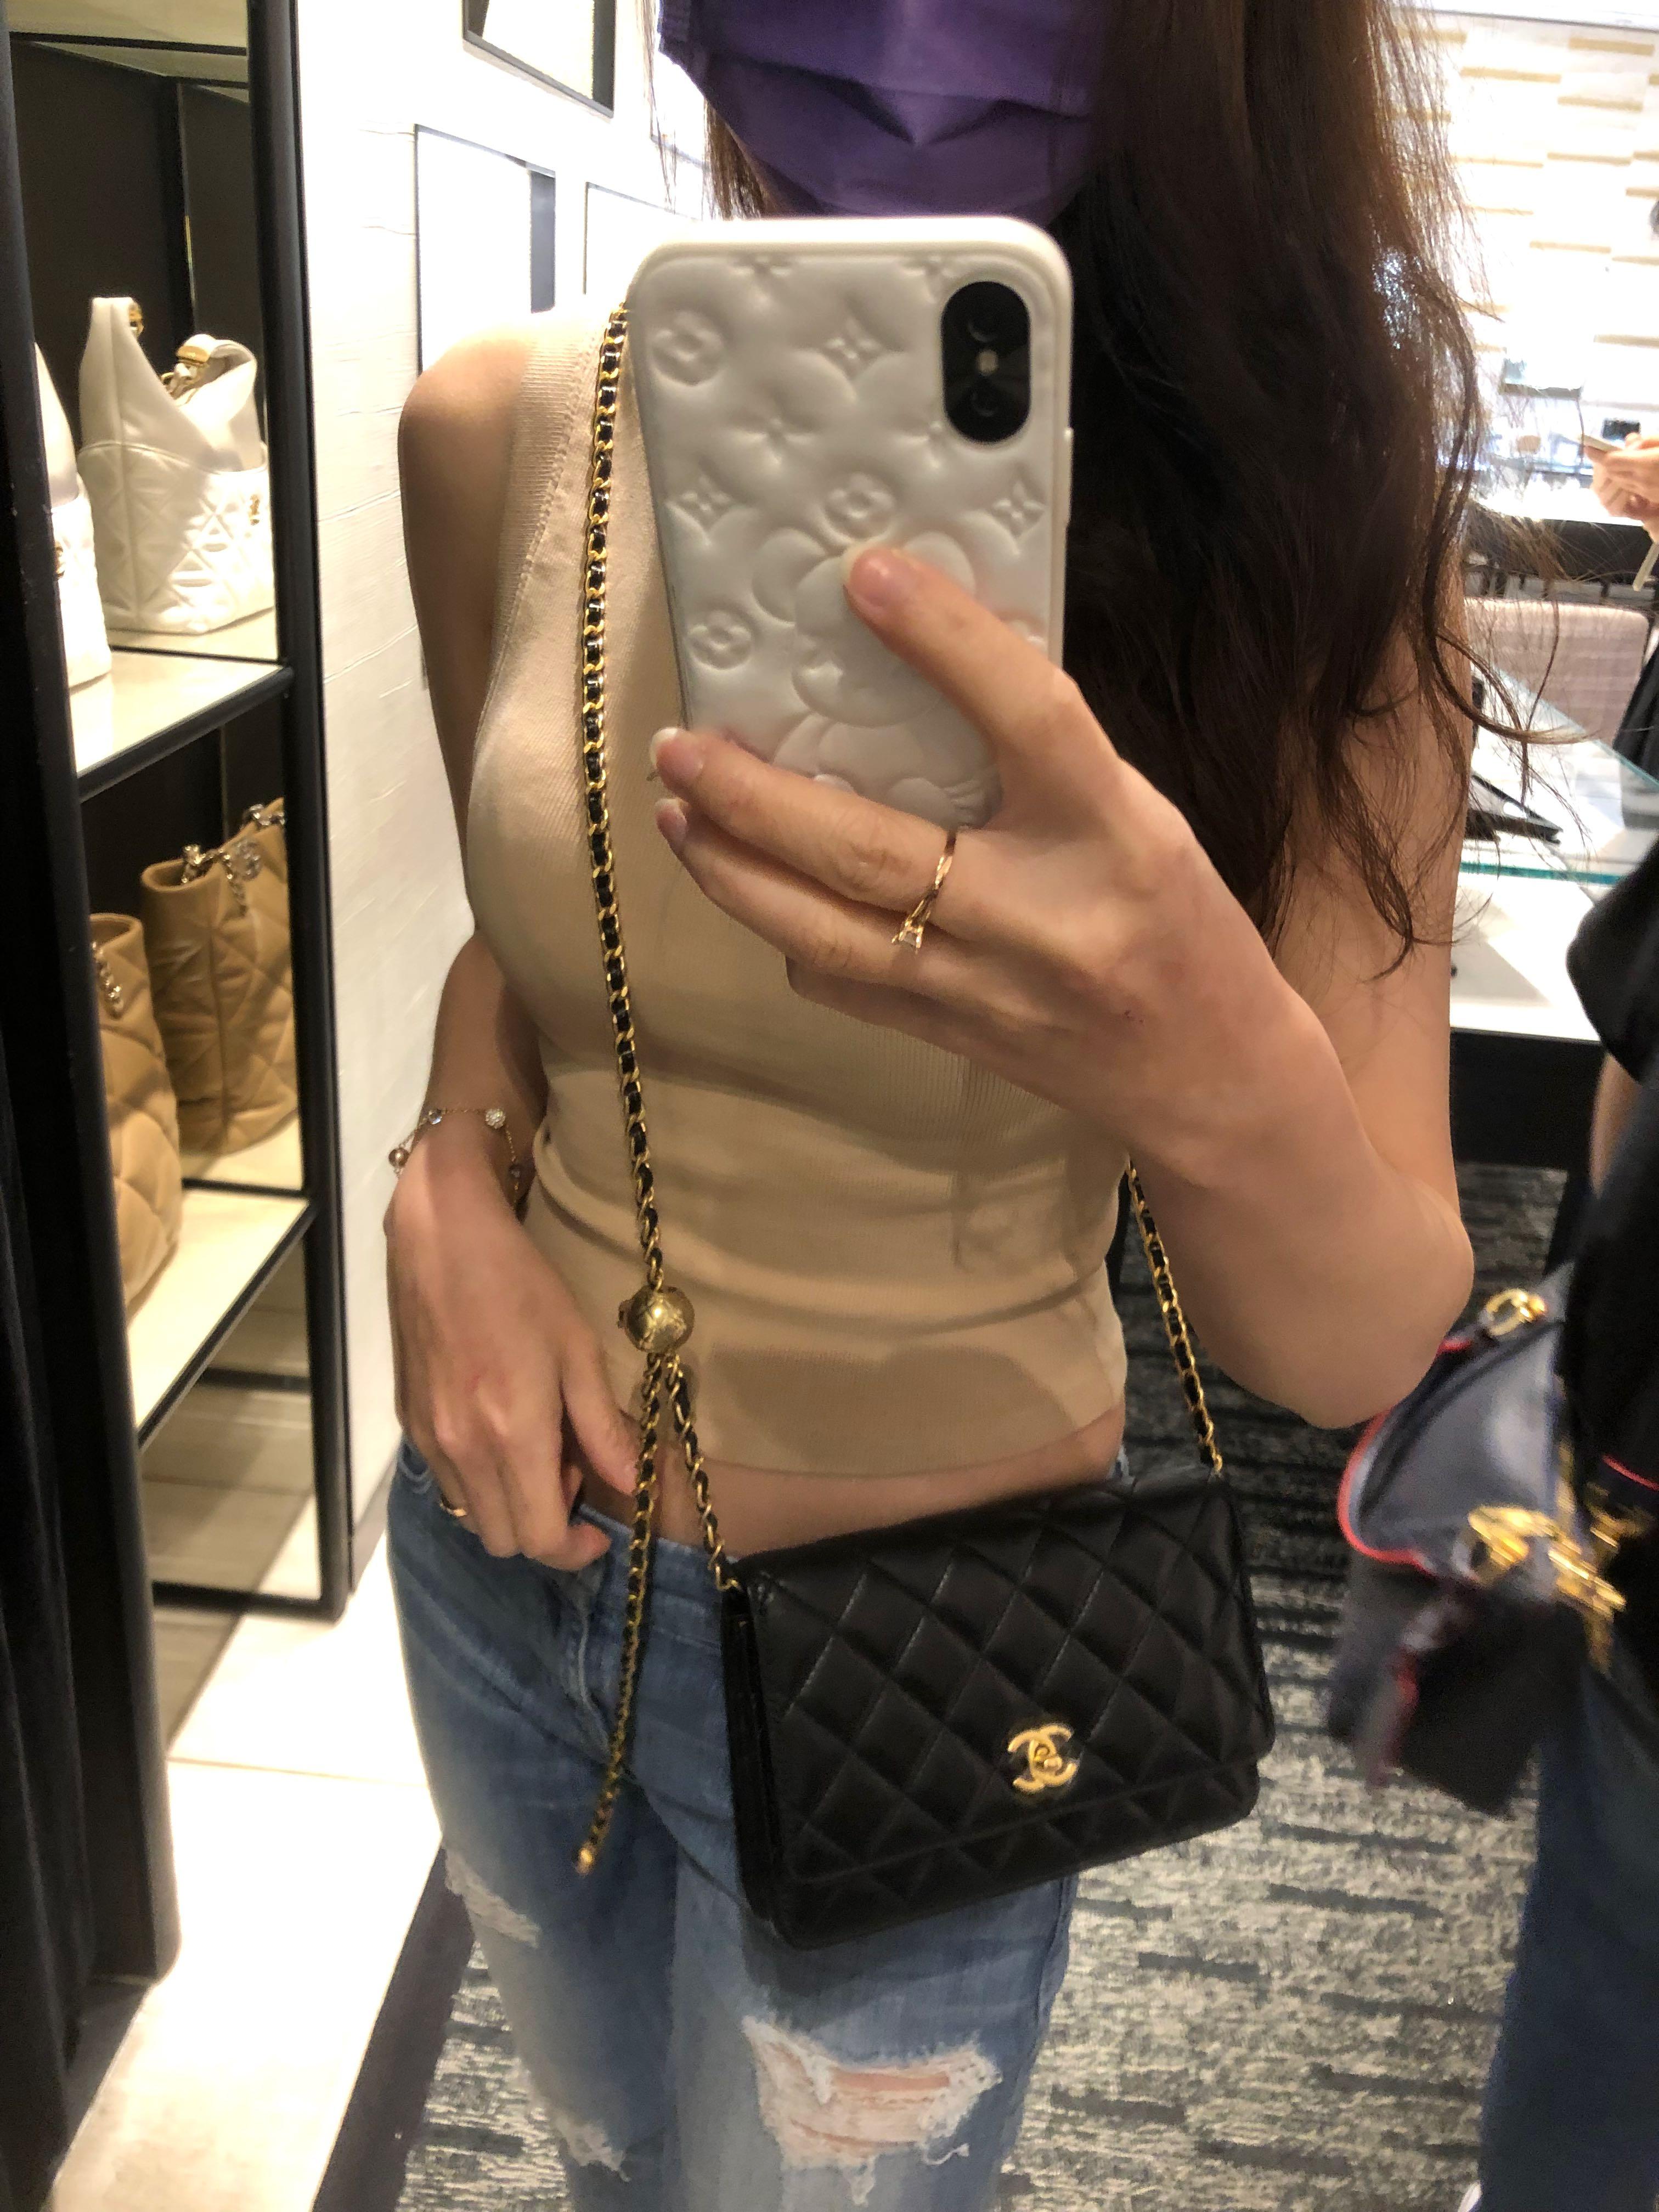 Chanel Black 2022 Pearl Crush Wallet on Chain